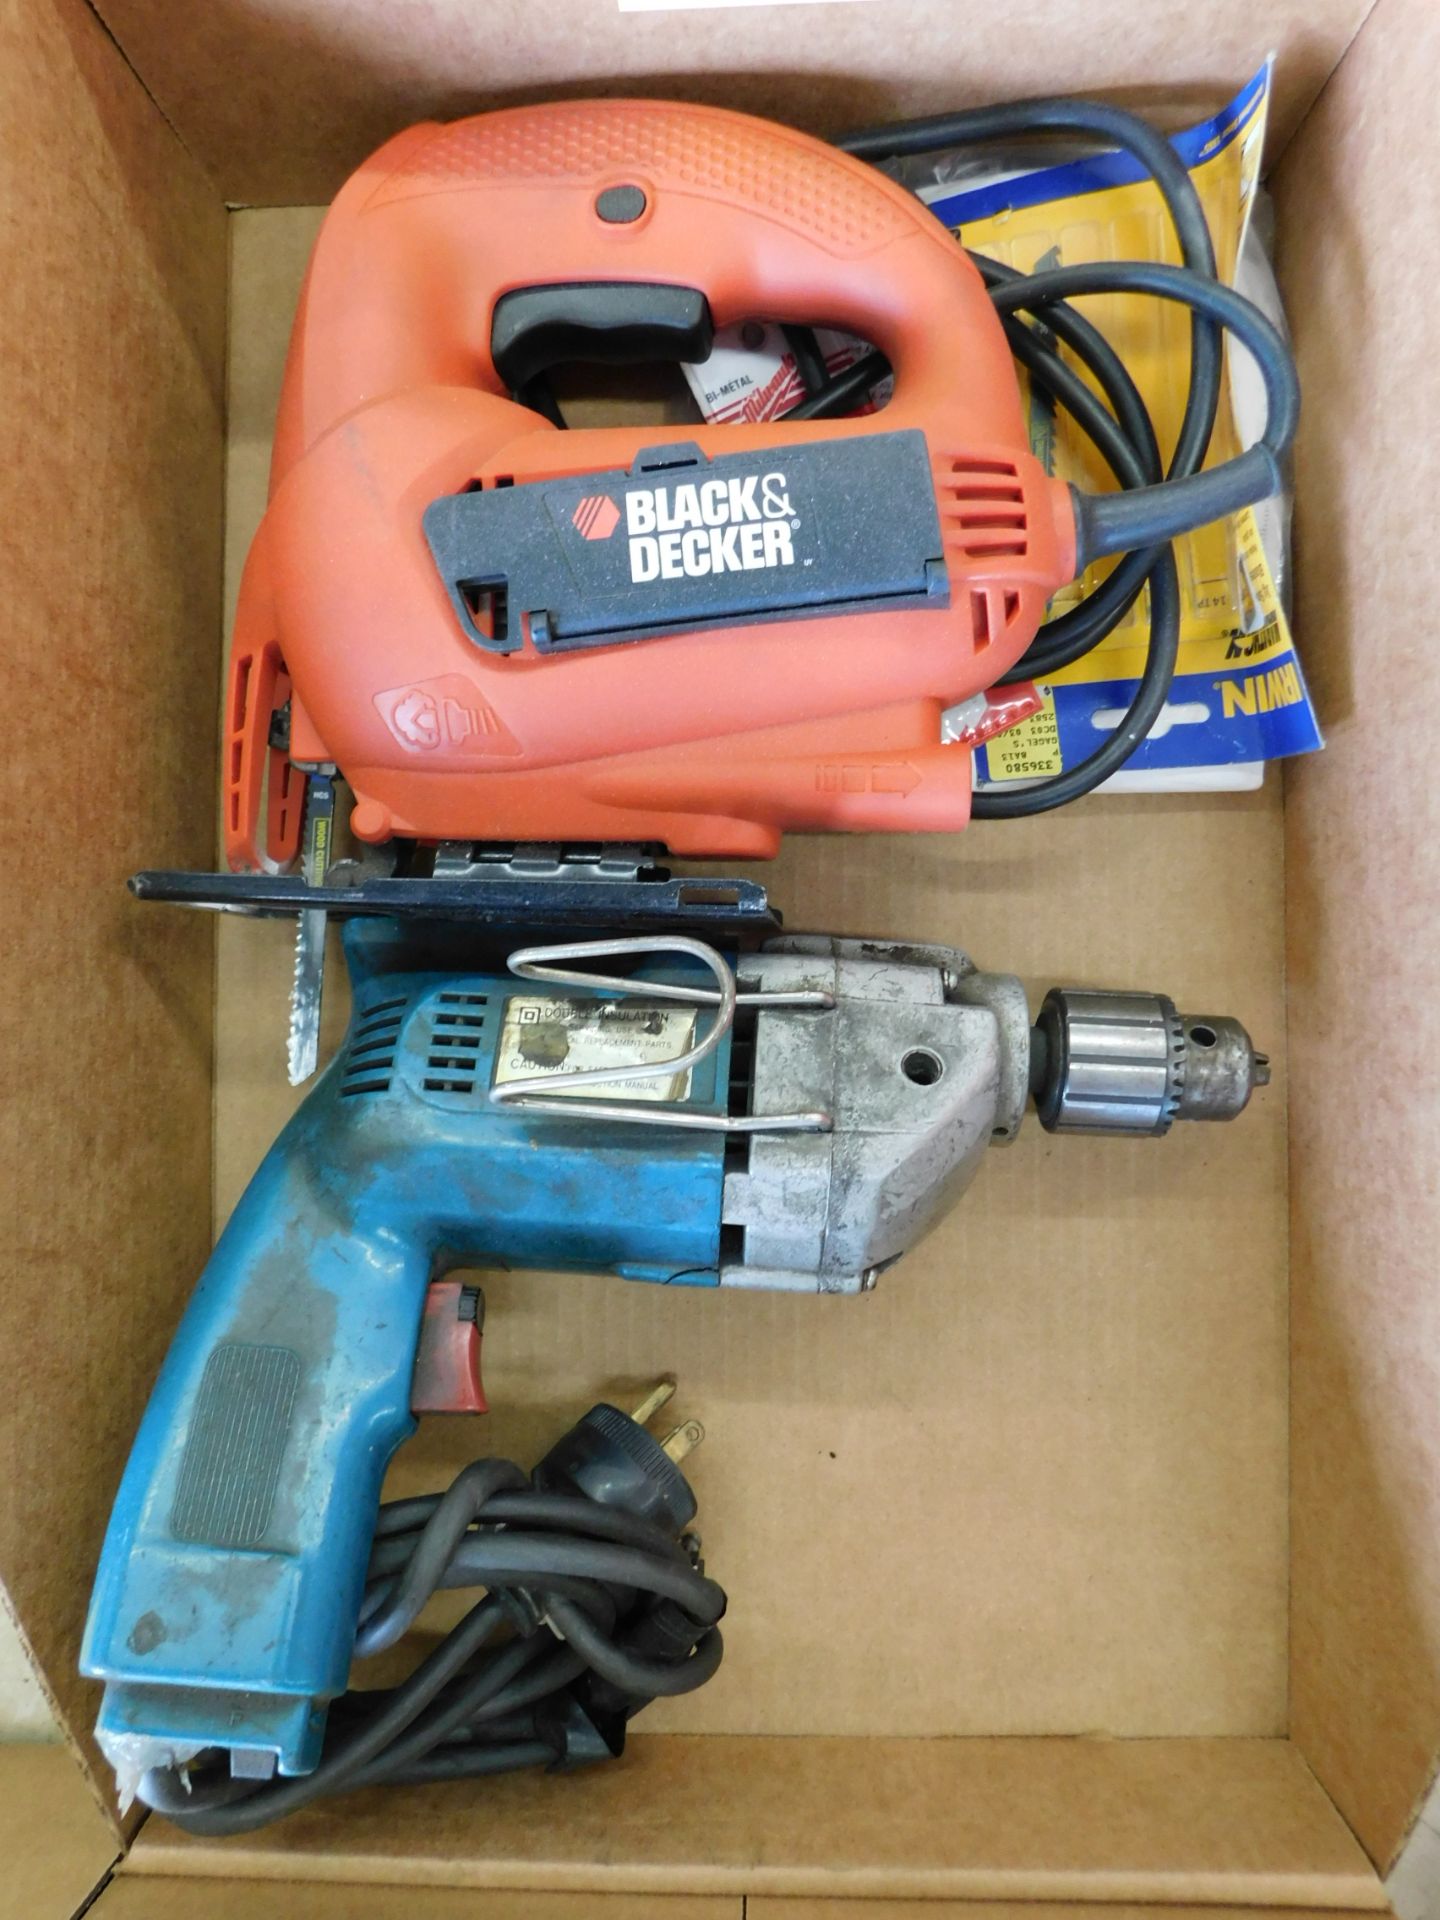 Cannon Electric Drill and Black & Decker Jig Saw